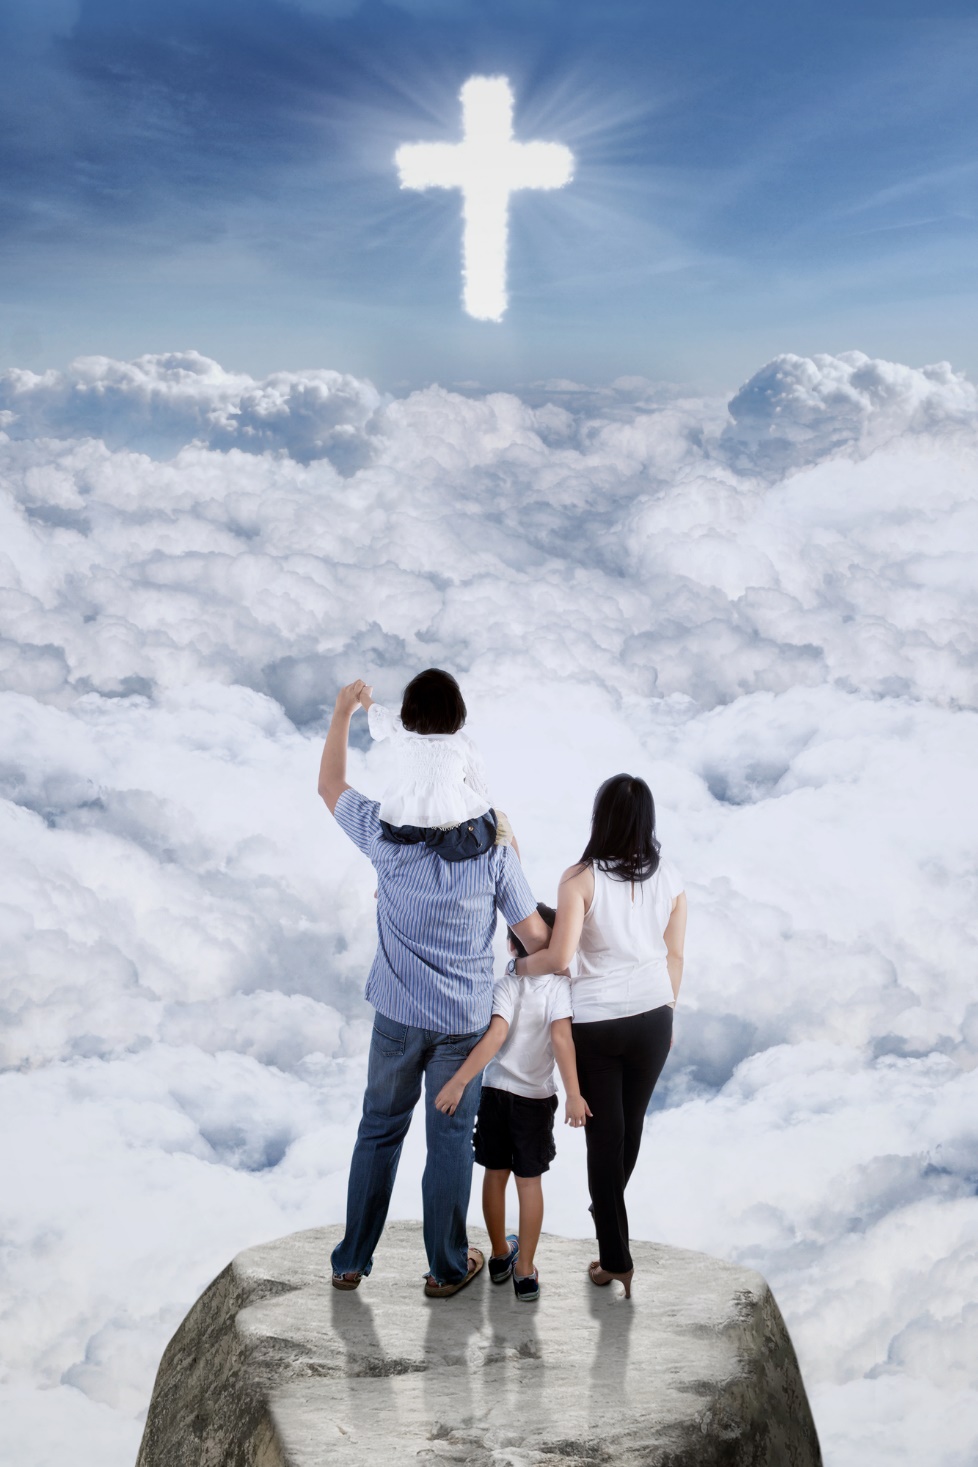 A family looking at a cross above the clouds

Description automatically generated with low confidence